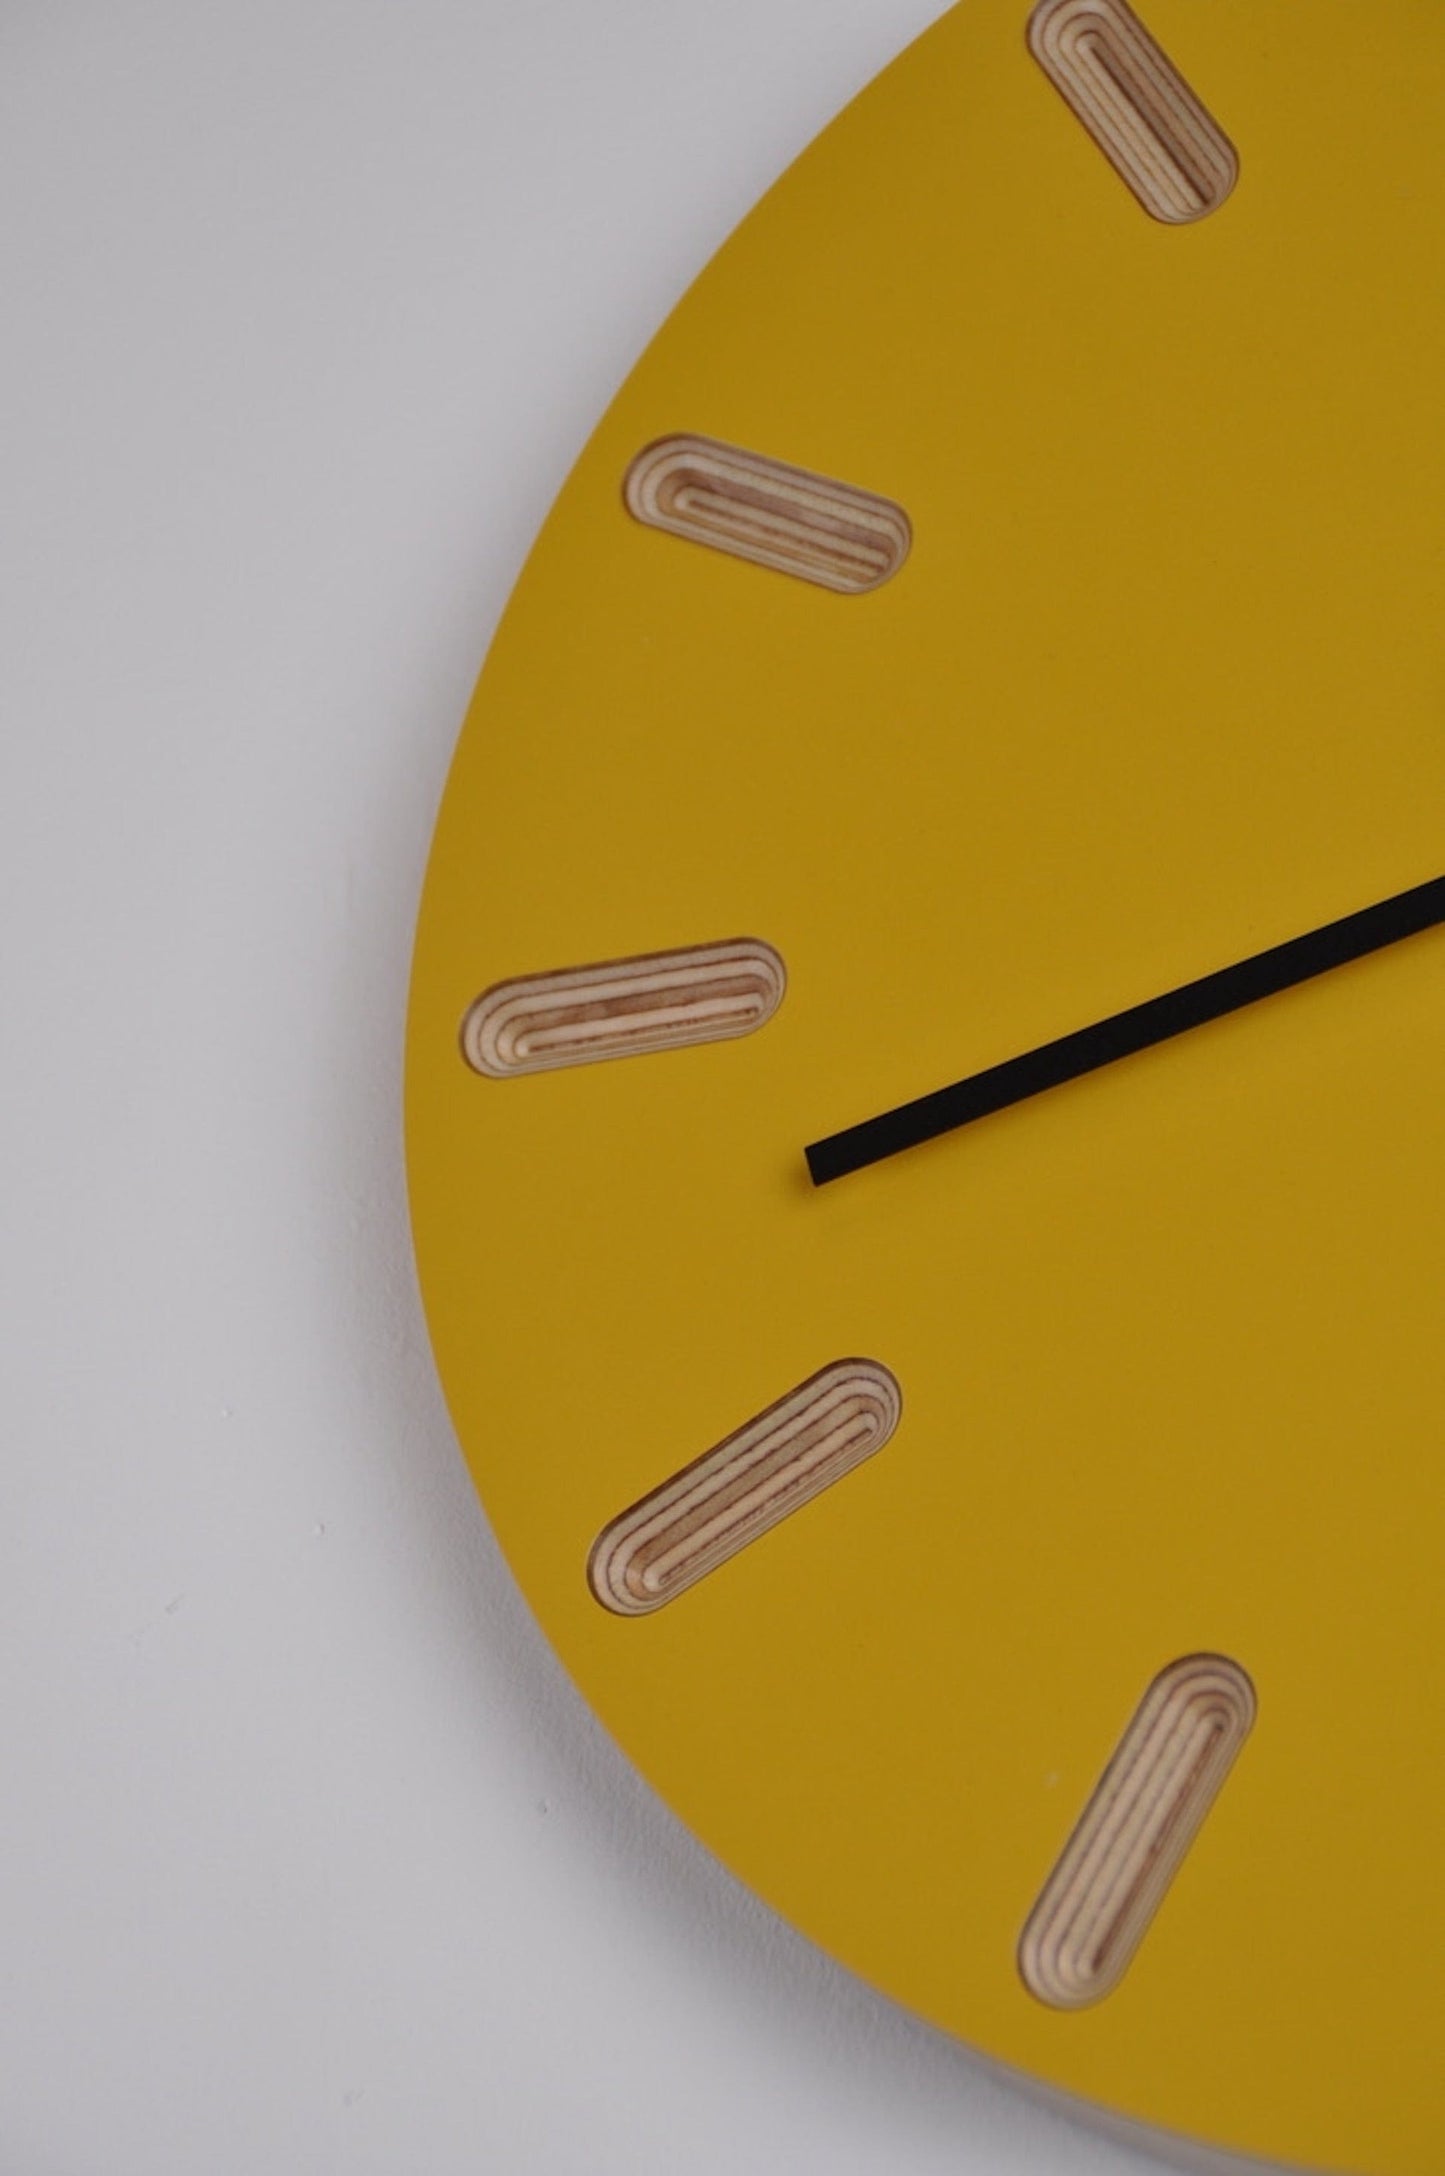 PRIORMADE Minimal Wooden Wall Clock - Yellow (black or brass hands available)